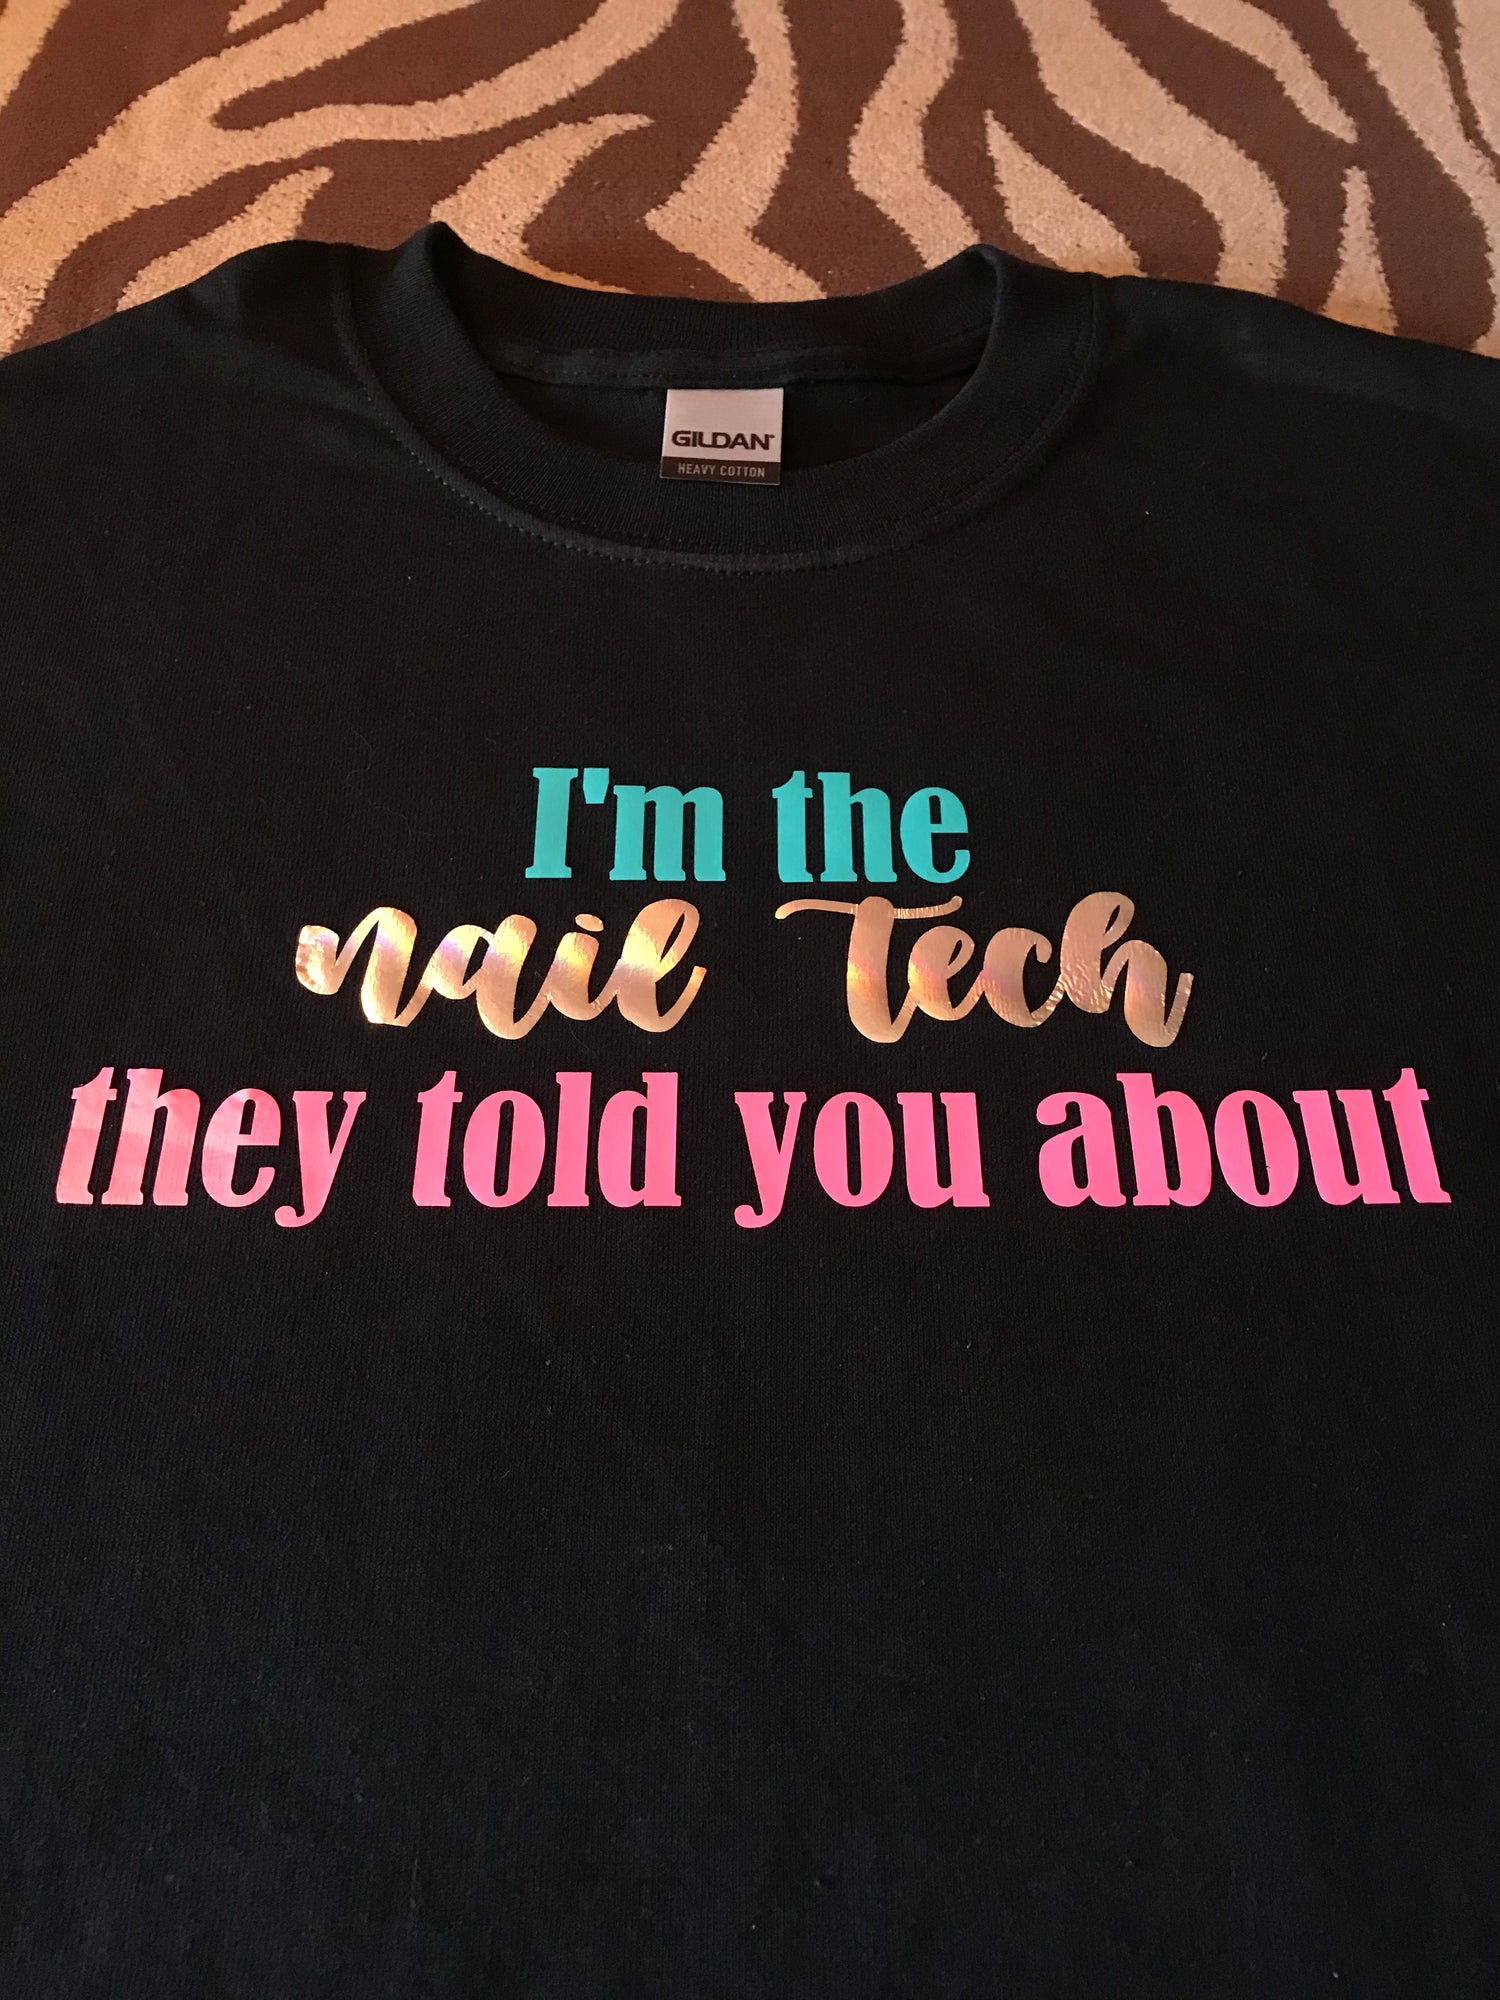 Quote Shirts